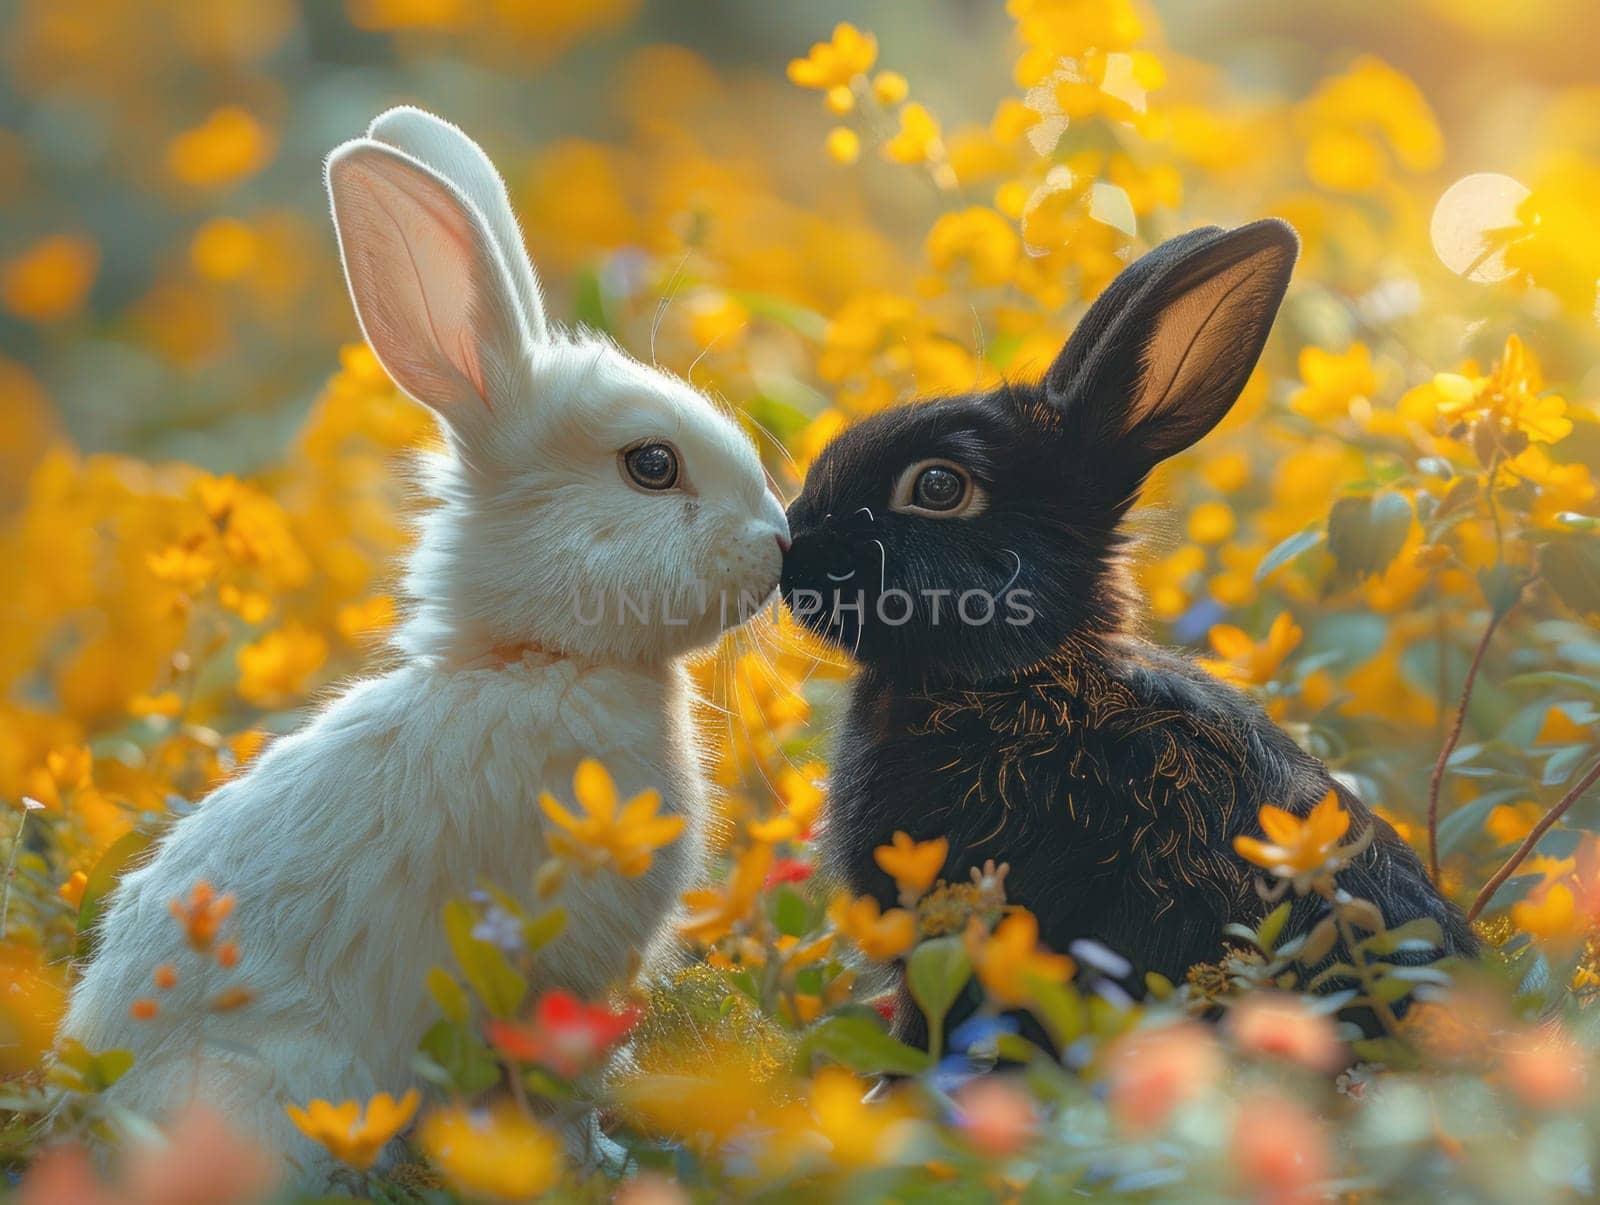 Two Rabbits Sitting in Field of Flowers by but_photo